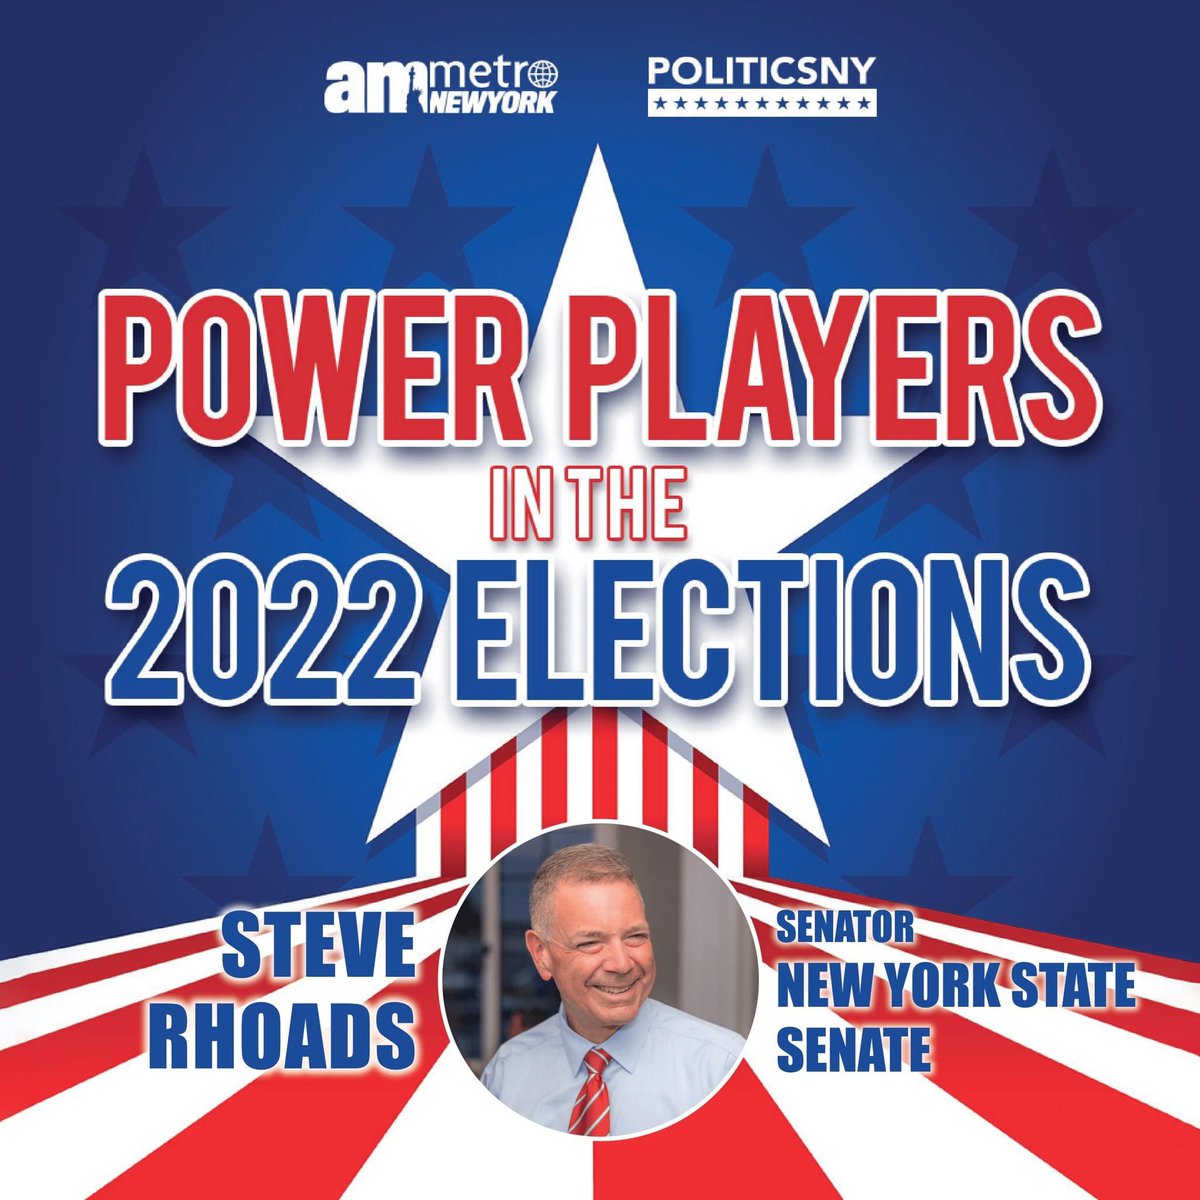 It's an honor to be named a 'Power Player in the 2022 Elections' by @PoliticsNYnews and @amNewYork! I am eager to put politics aside and deliver results for the people of the fifth Senate district. #NYSenate #longisland #politicsnypp #amnypp #steverhoads #NewYork